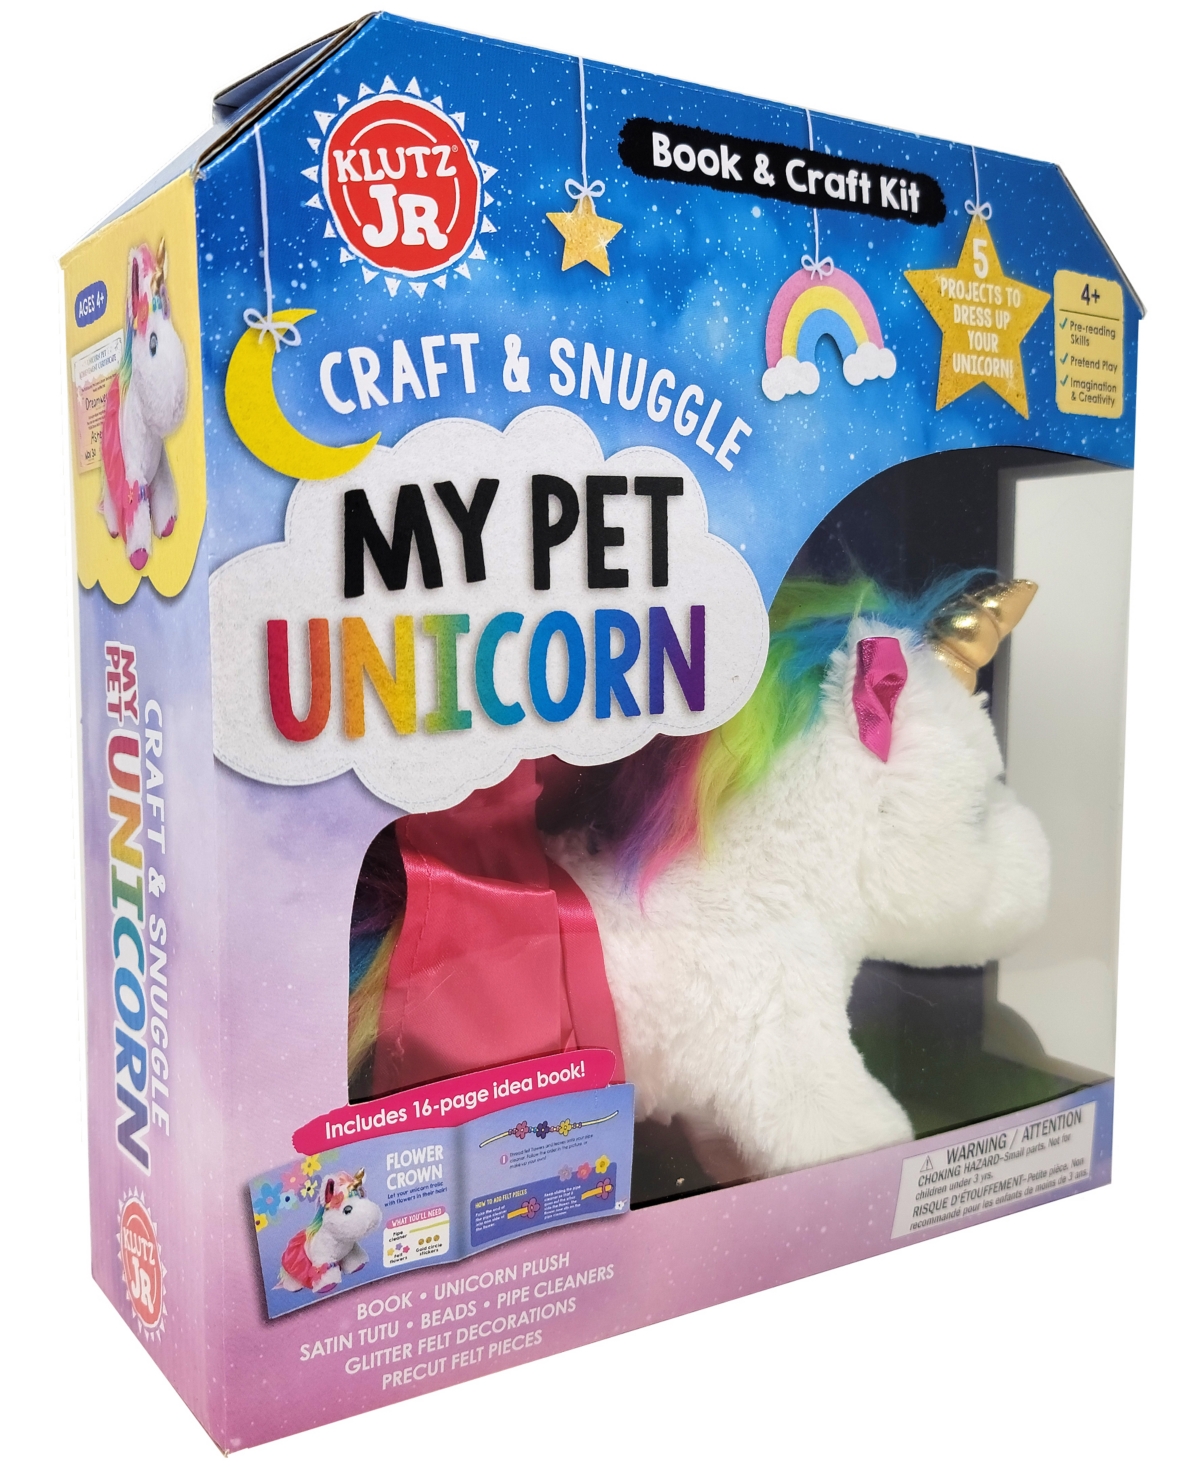 Klutz Babies' Jr. Craft Snuggle My Pet Unicorn Toy In No Color